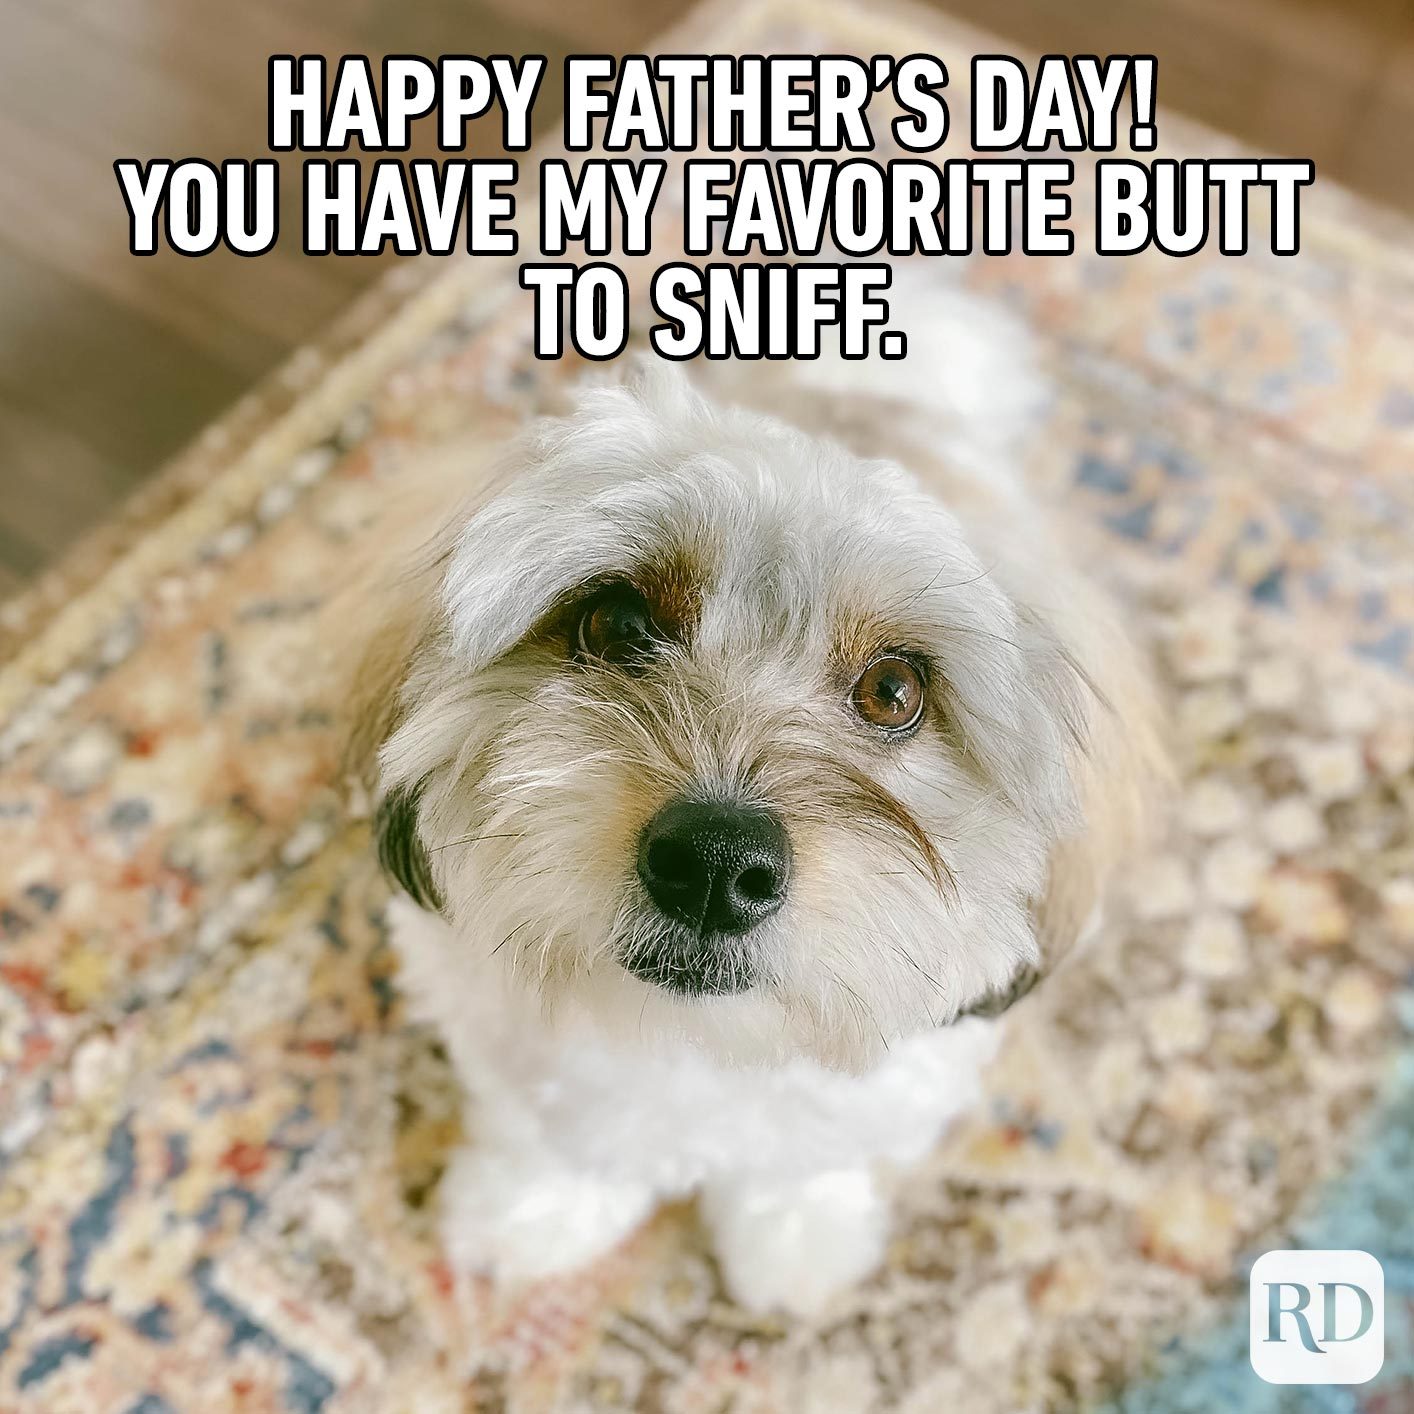 Scruffy dog. Meme text: Happy Father's Day! You have my favorite butt to sniff.